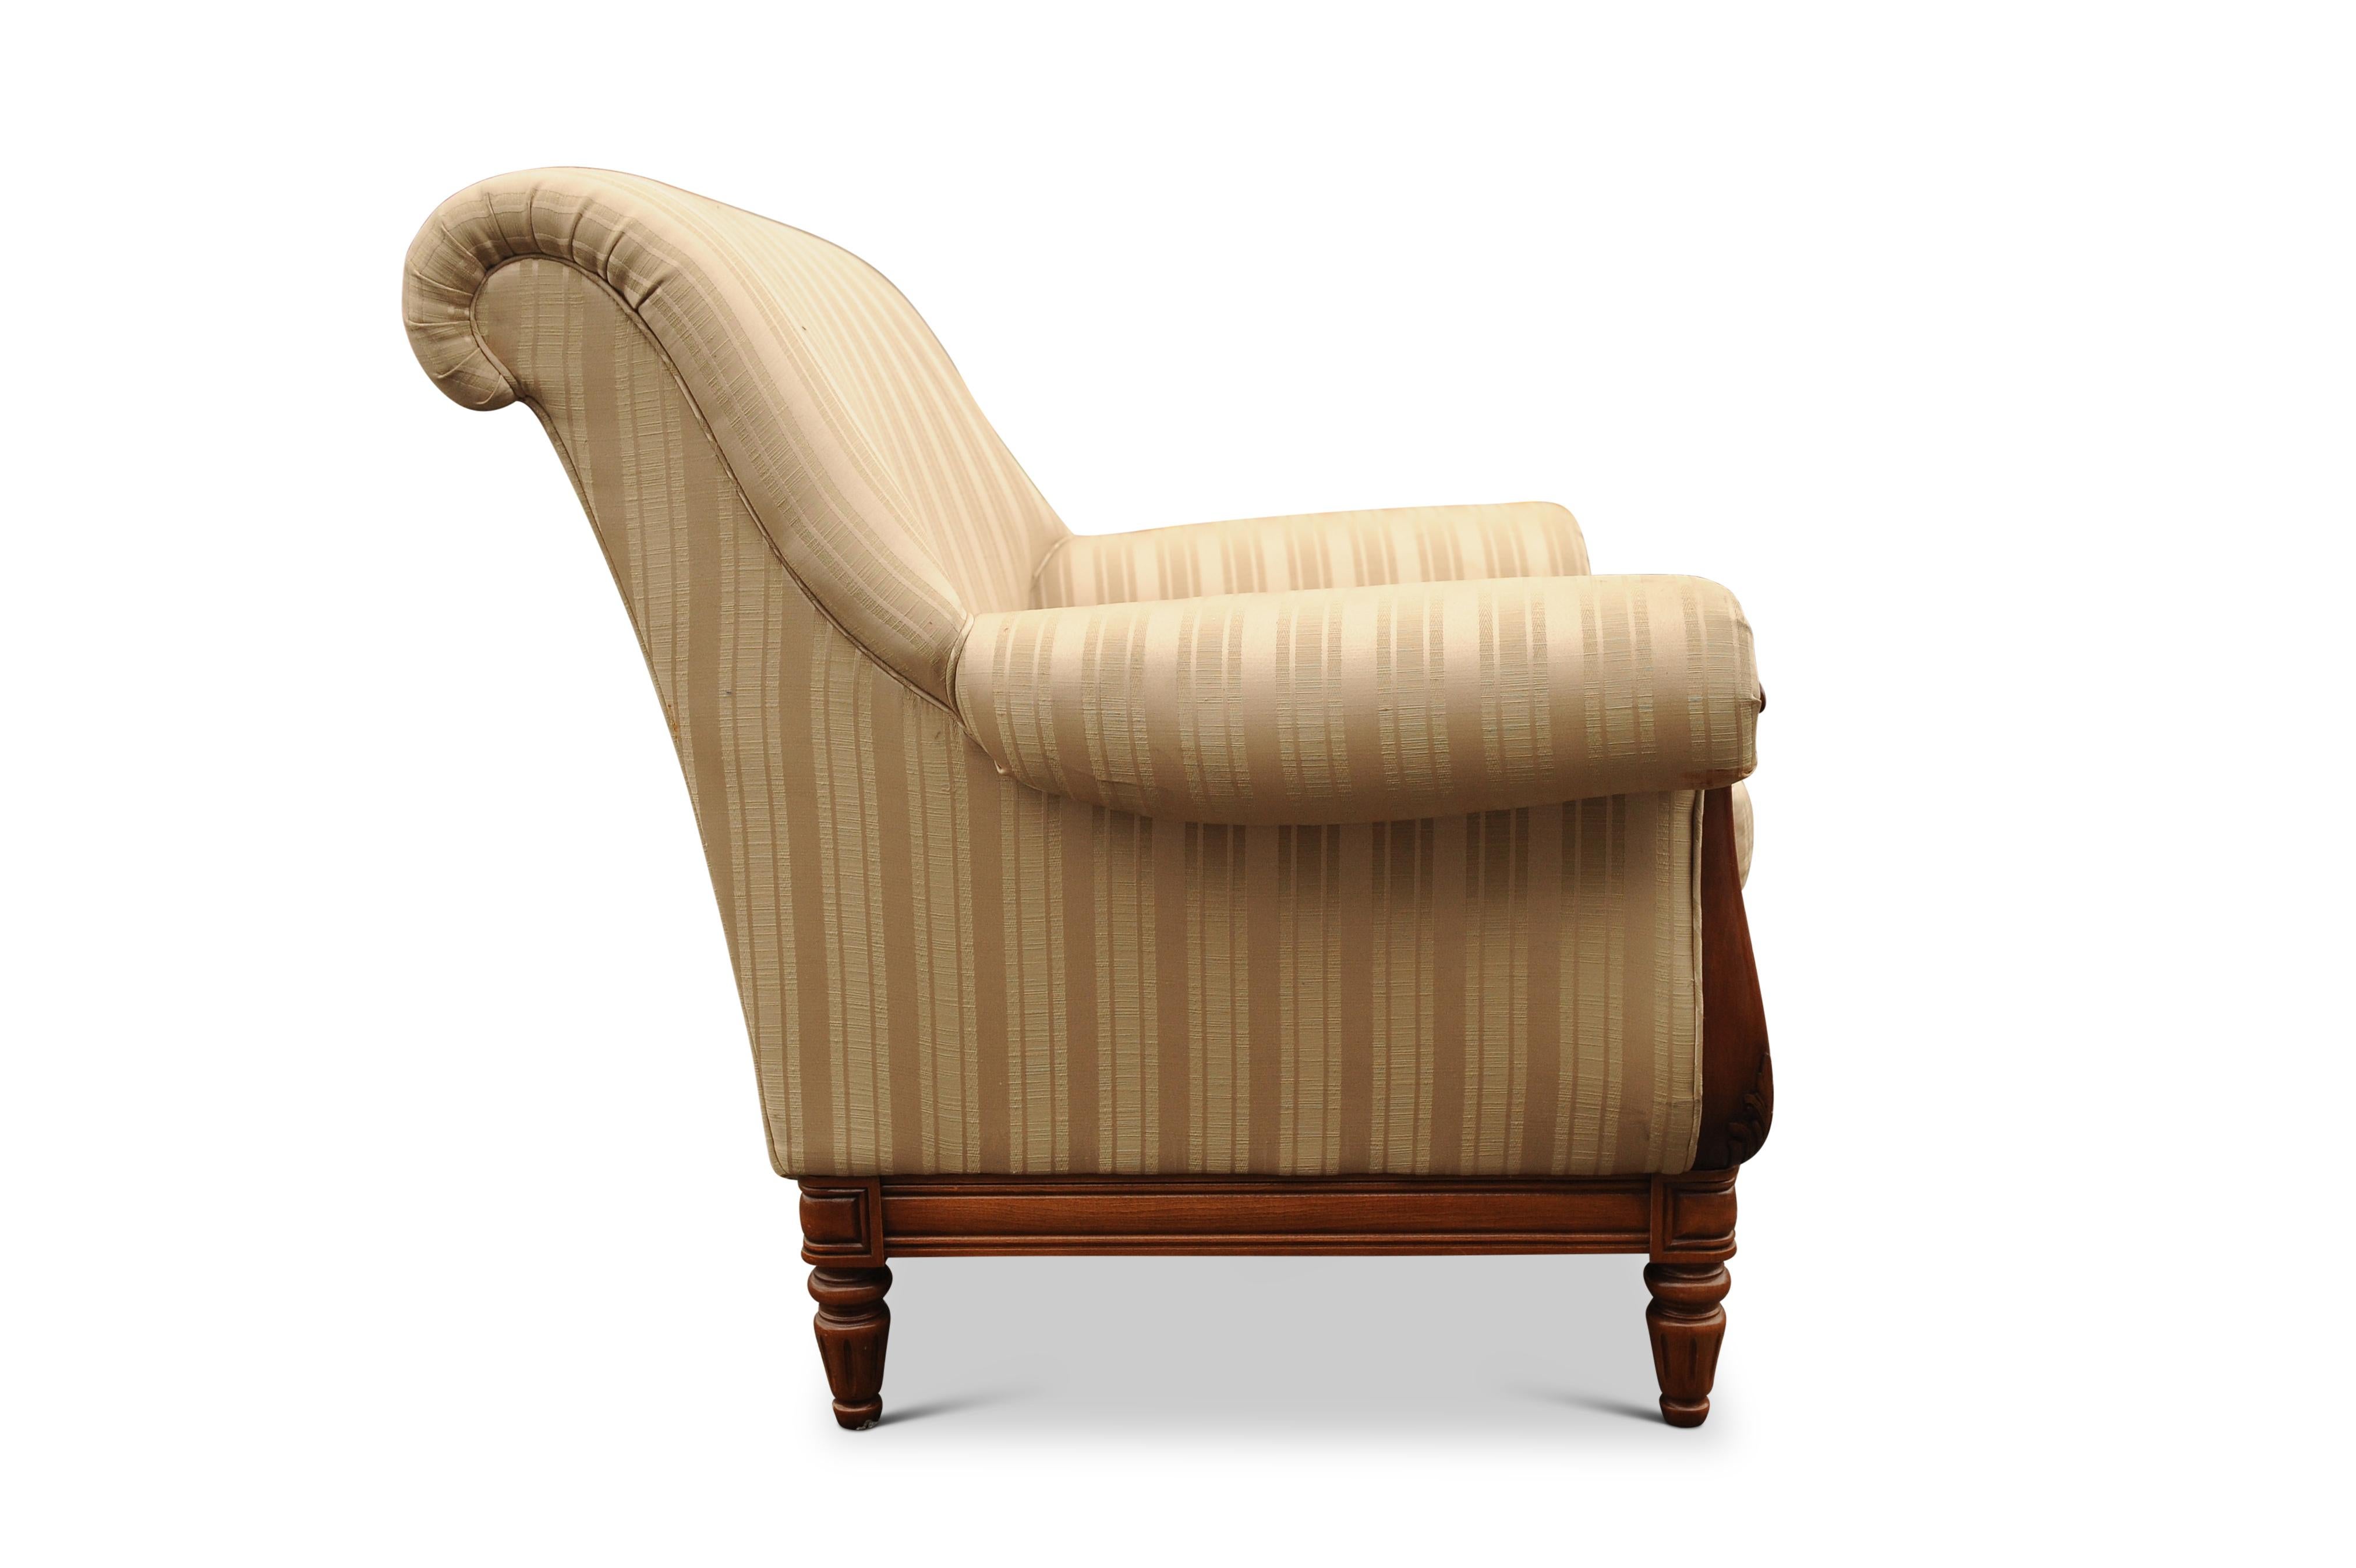 A William IV Empire Design Library Armchair Striped Cream Silk Upholstery For Sale 1